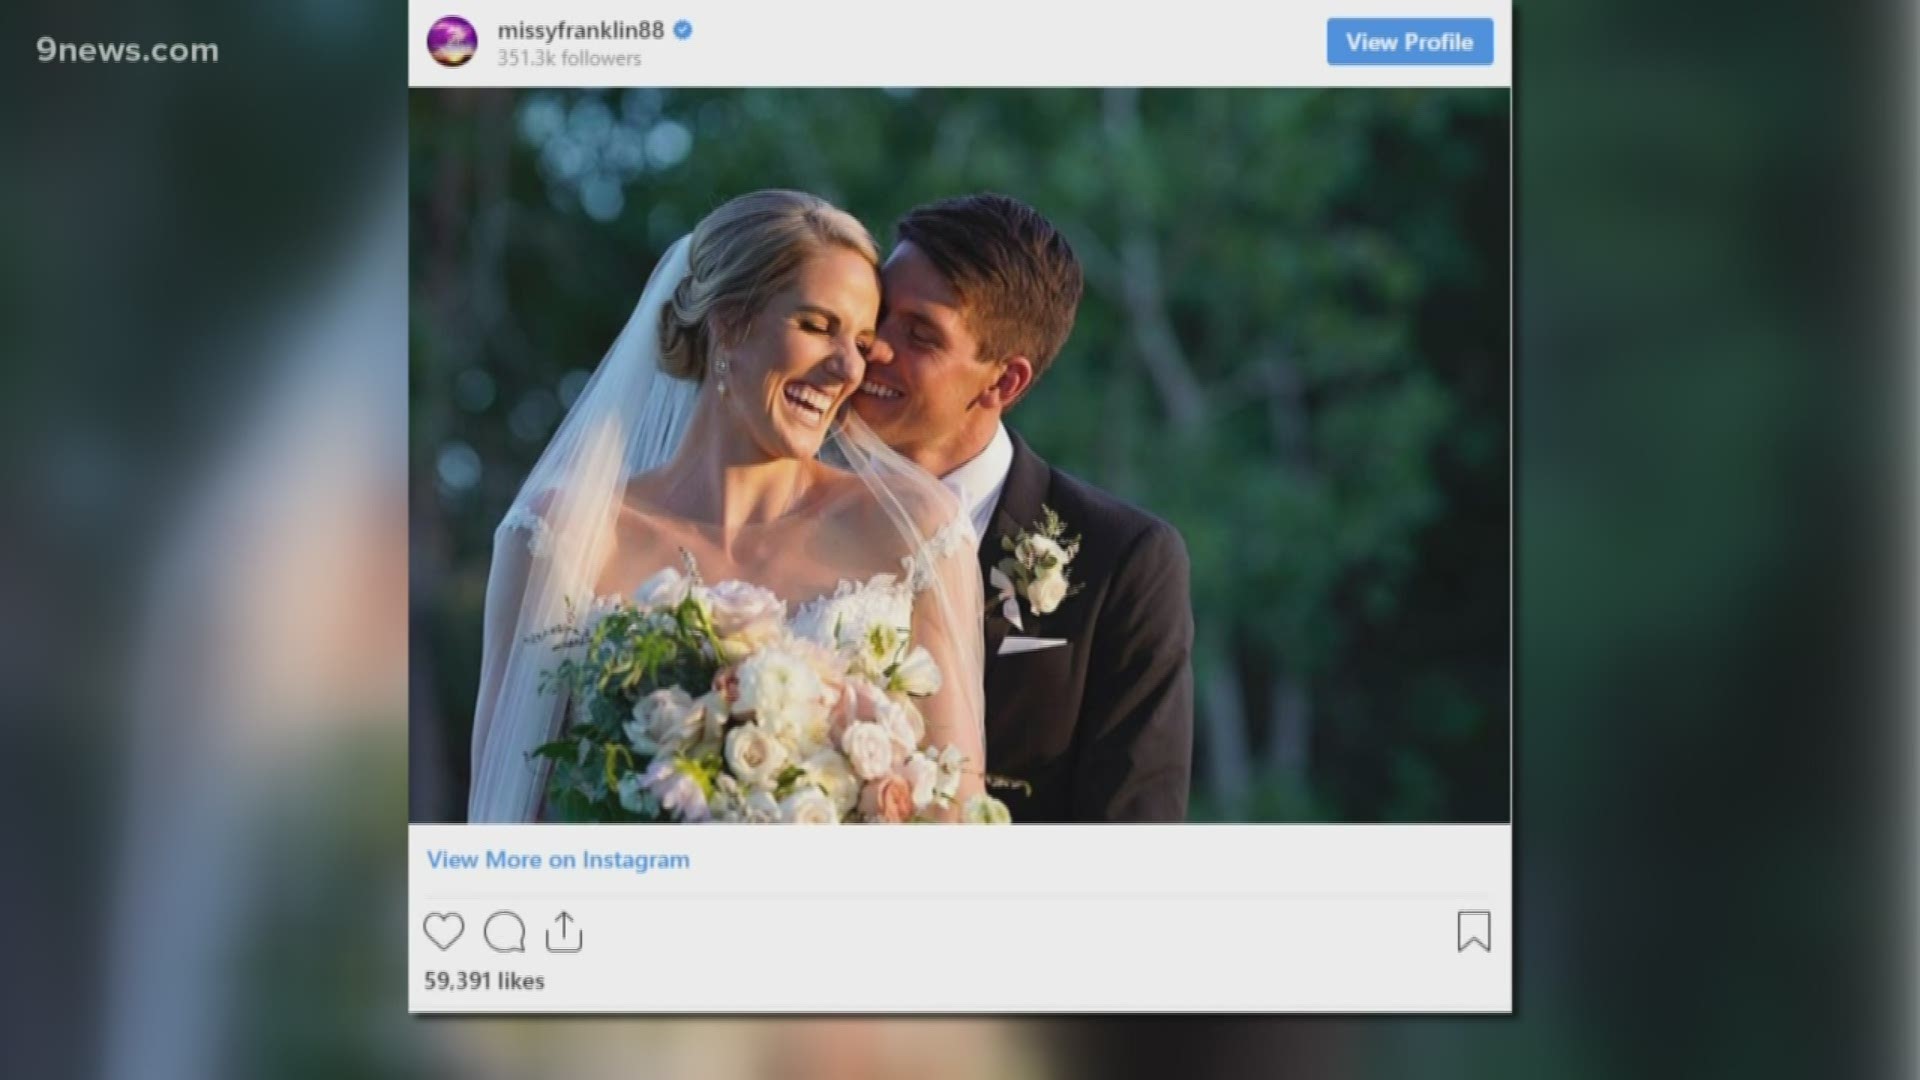 The Colorado native married fellow swimmer Hayes Johnson over the weekend.